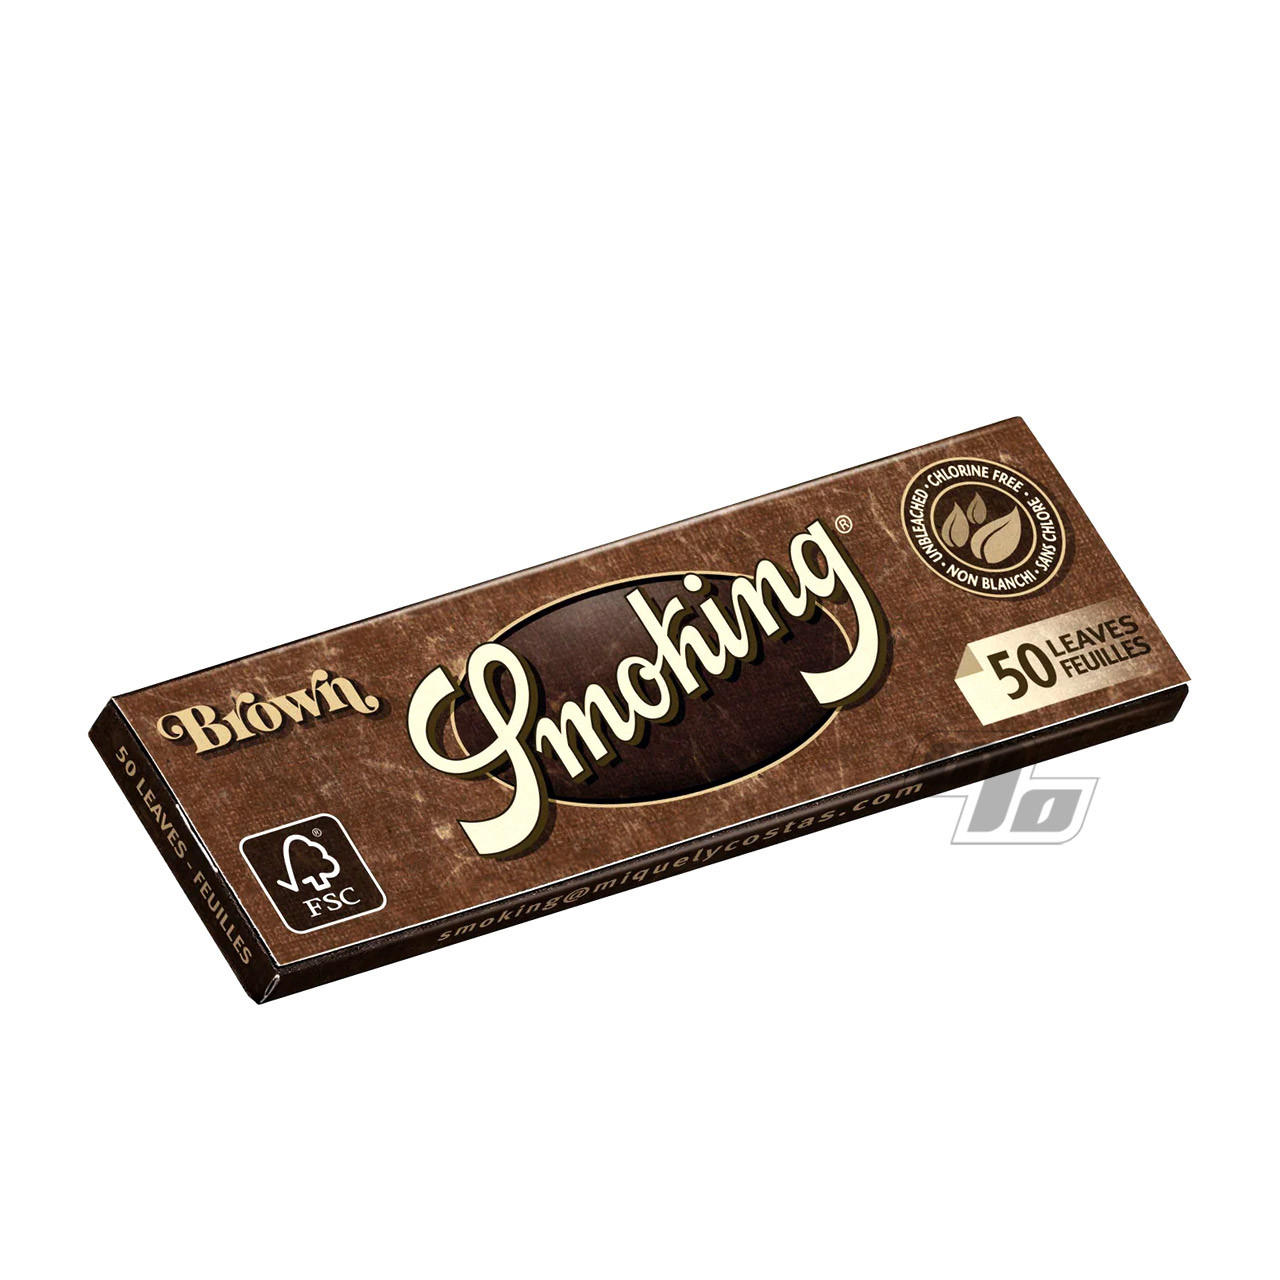 https://cdn11.bigcommerce.com/s-uuizzj6vec/images/stencil/1280x1280/products/12455/36020/smoking-brown-1-1-4-rolling-papers-pack__19953.1689957697.jpg?c=1